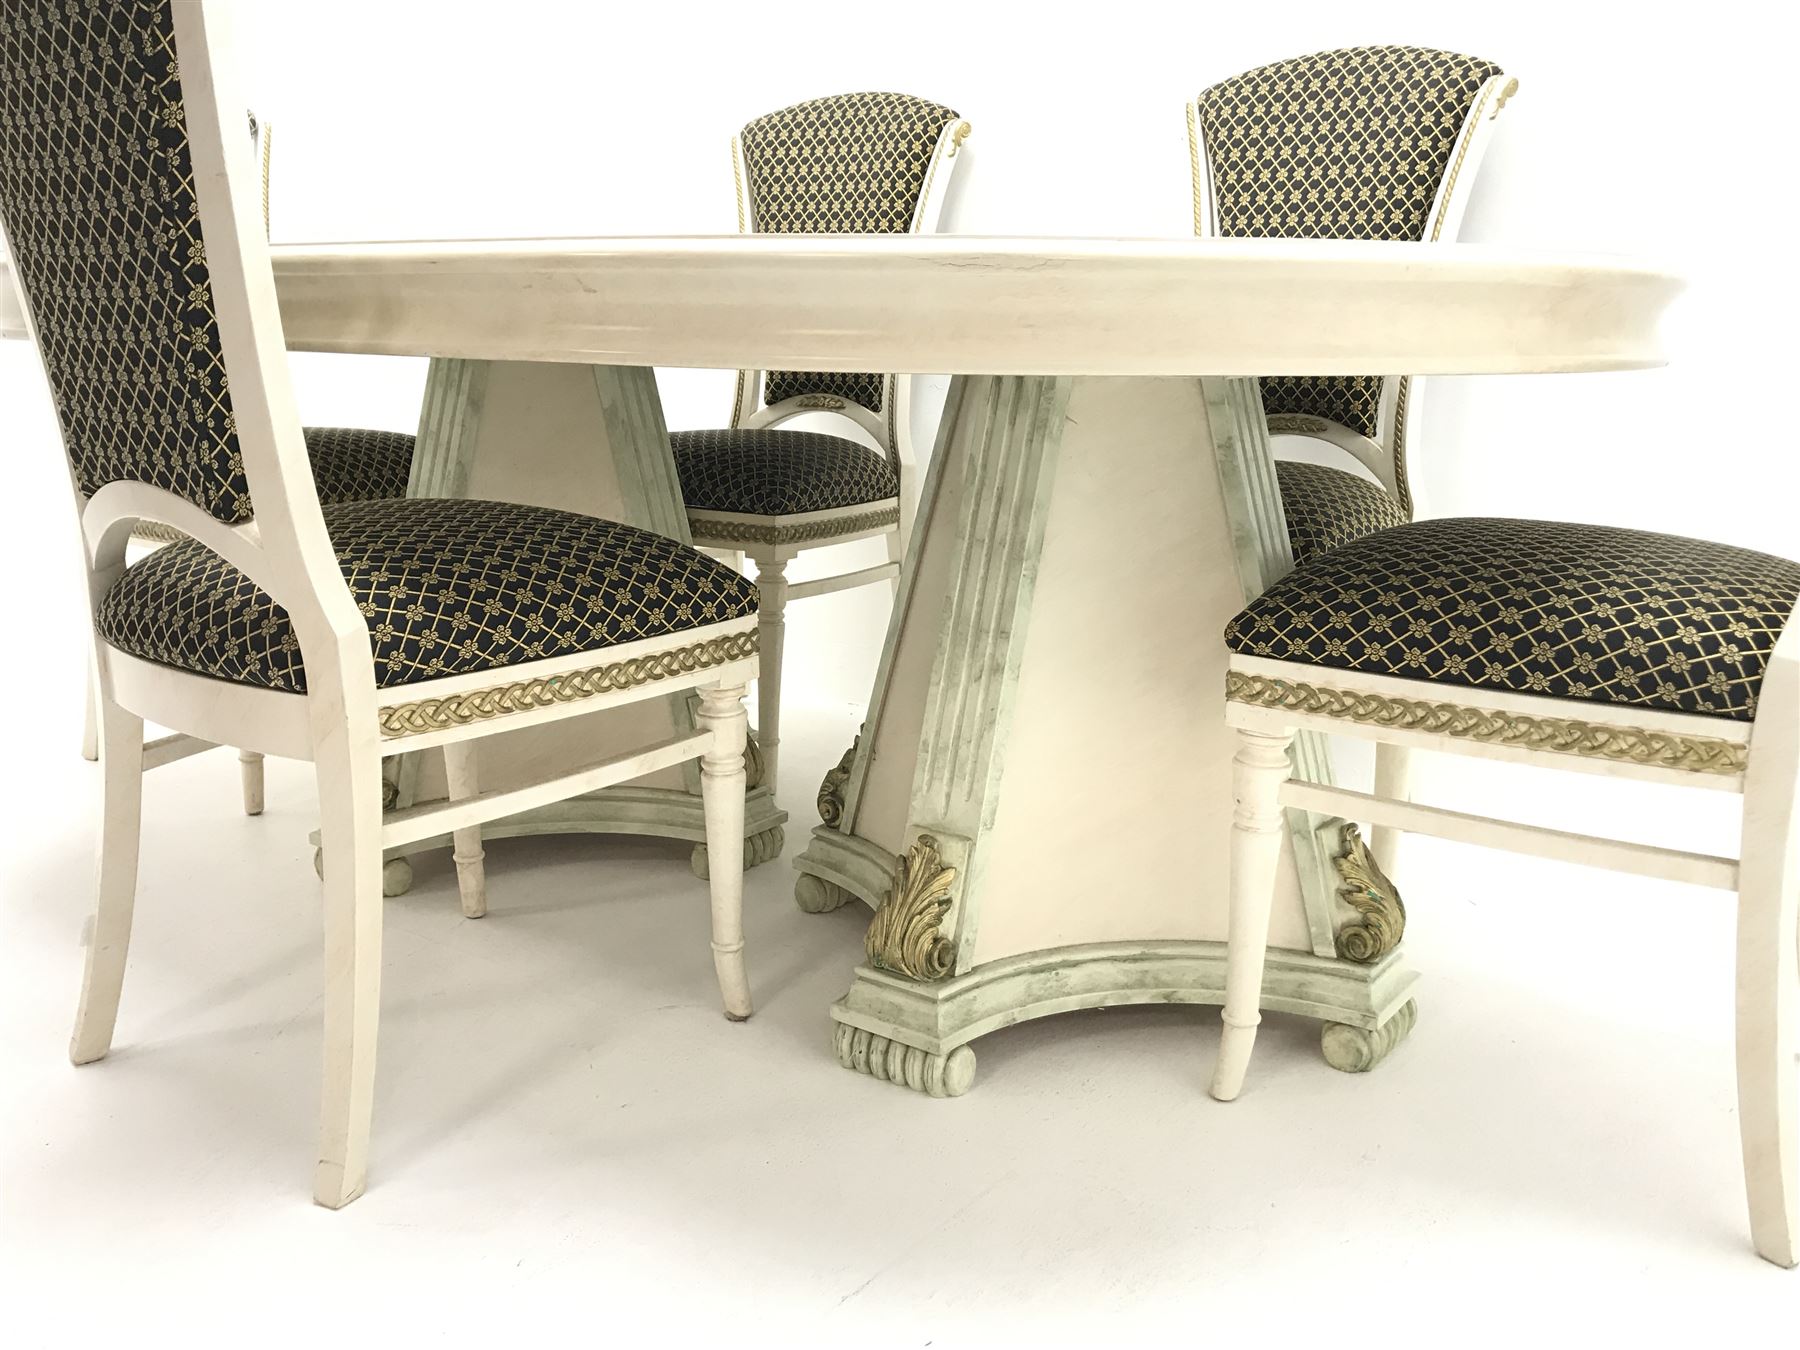 Italian style dining table - Image 3 of 4